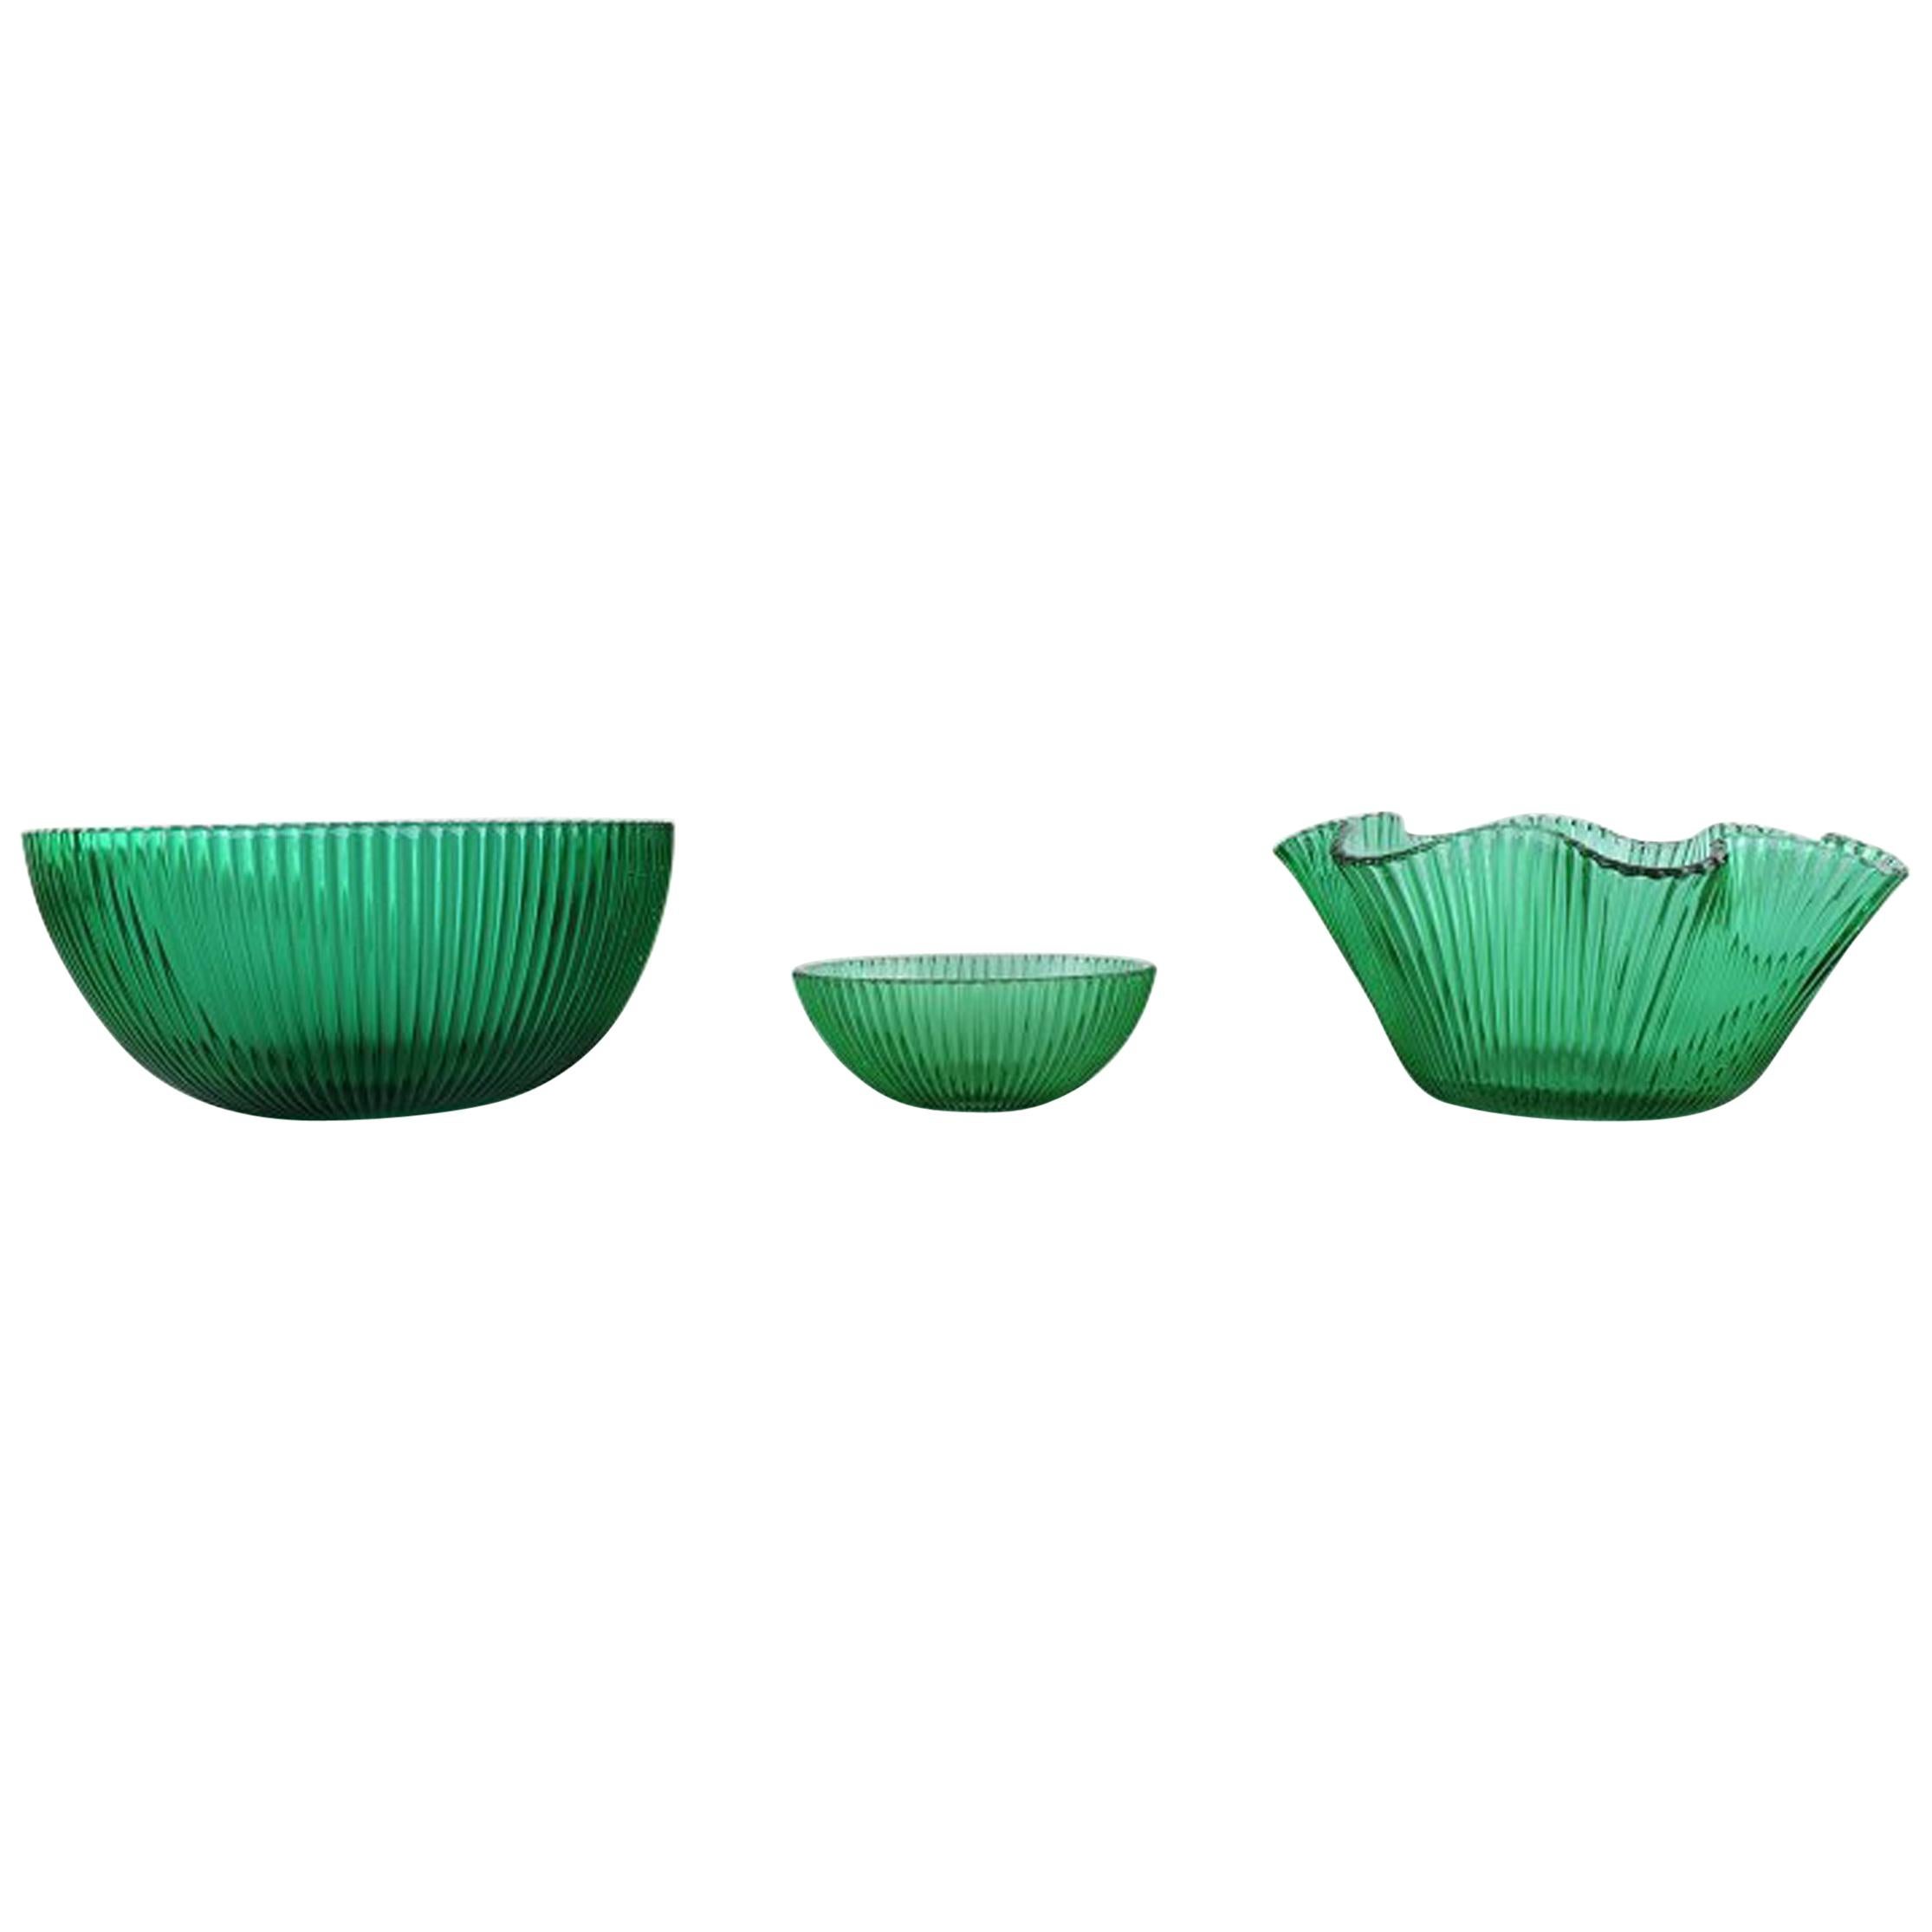 Arthur Percy for Nybro, Sweden, 3 Bowls in Green Art Glass, Fluted Design For Sale